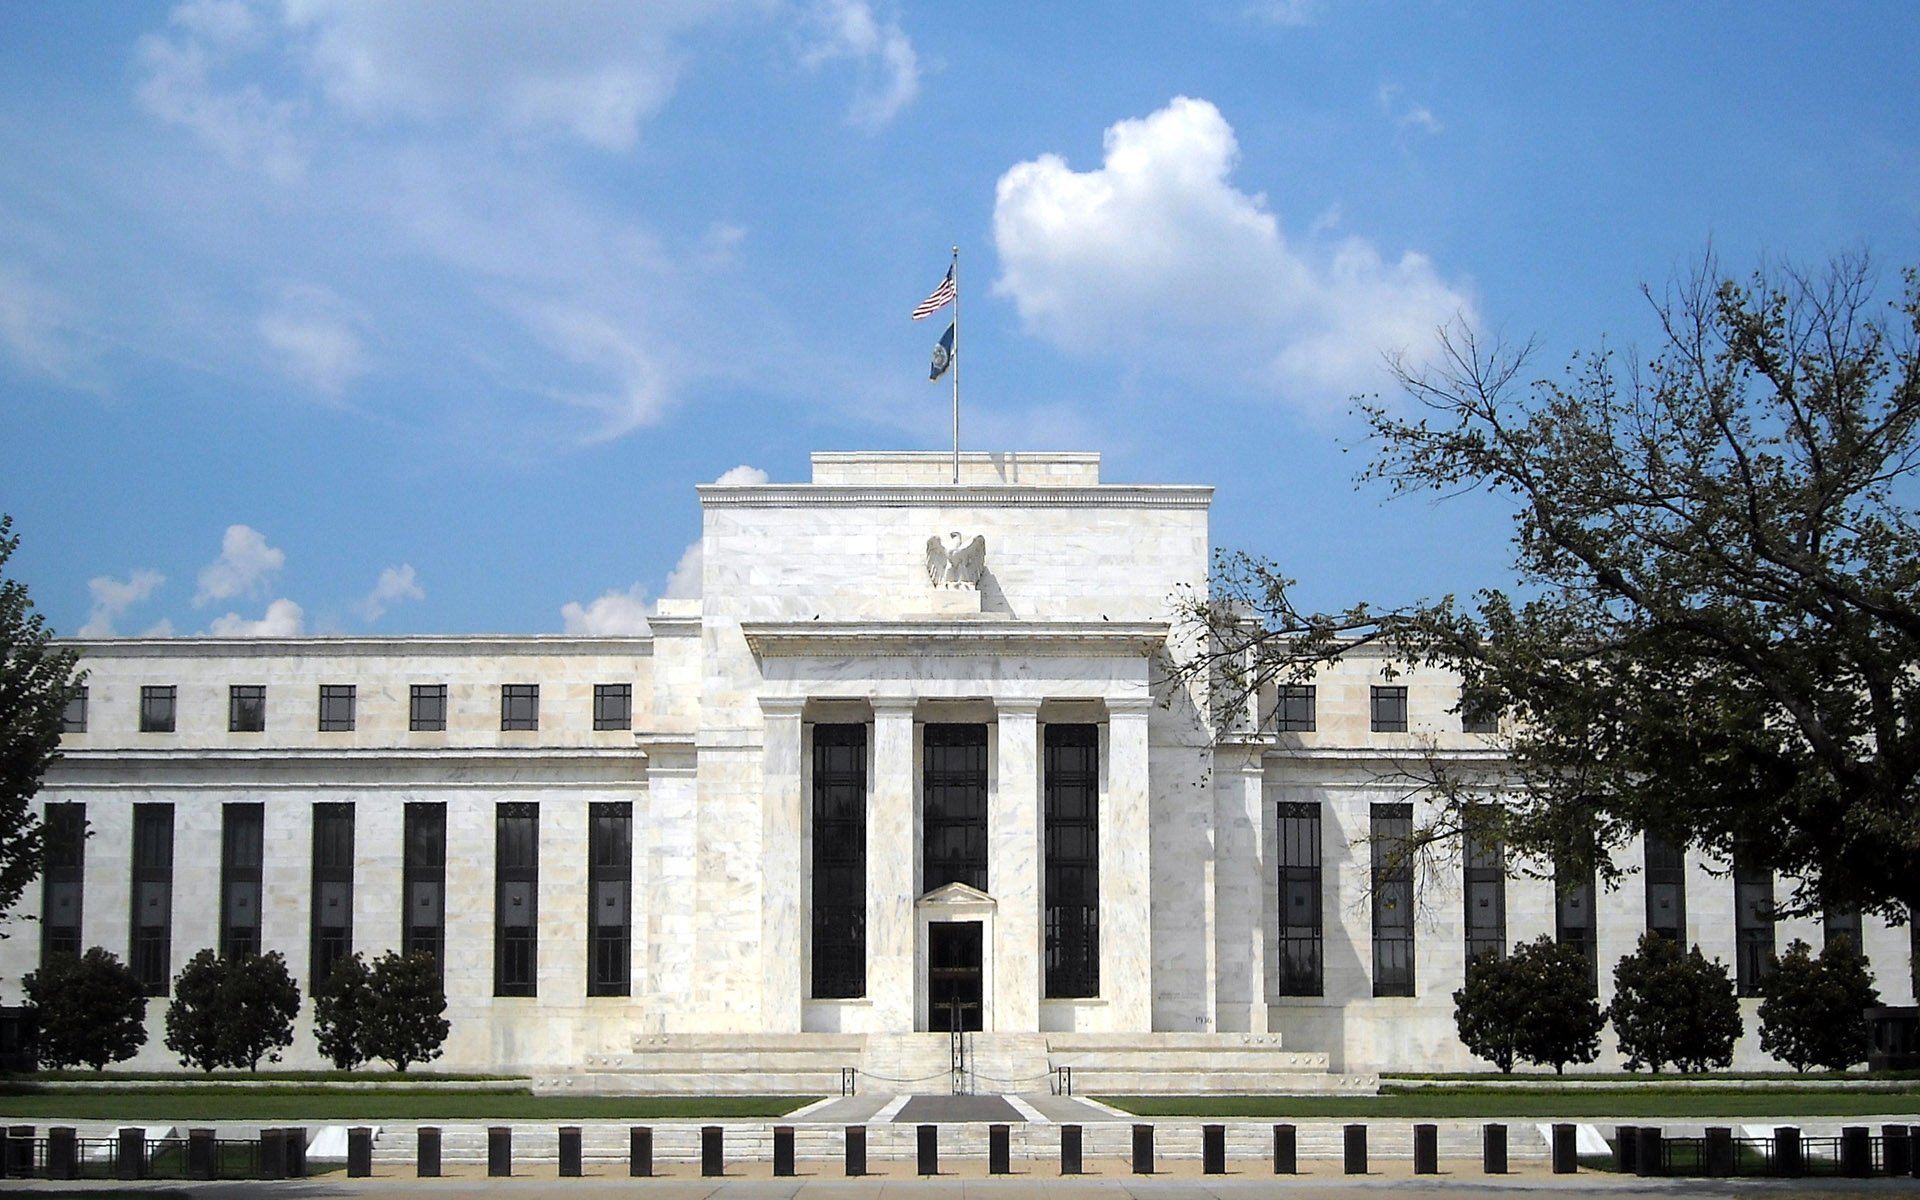 St. Louis Federal Reserve Bank: 3 Qualities Bitcoin and Cash Share